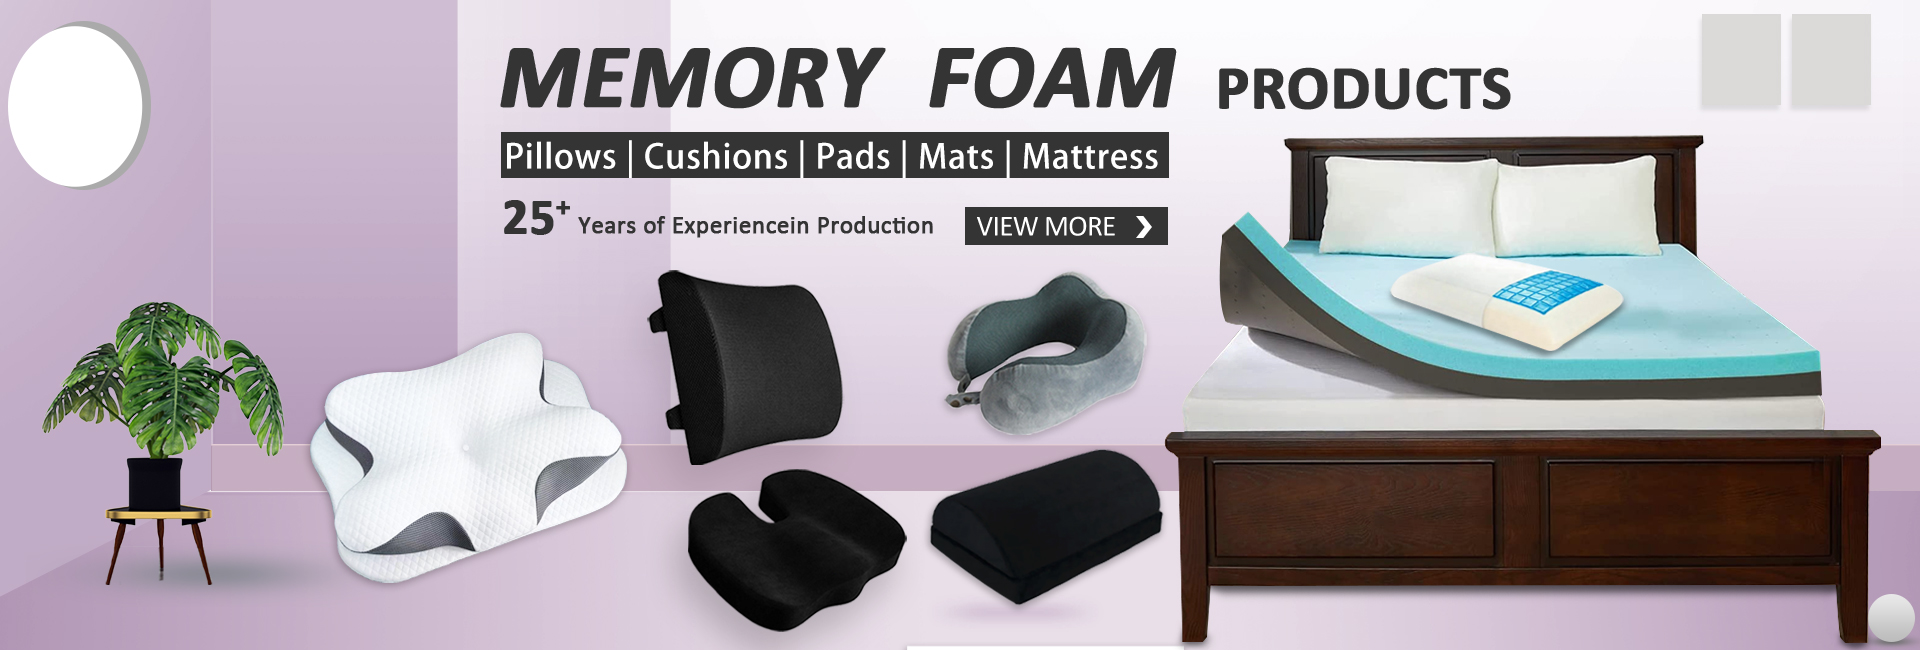 memory foam products